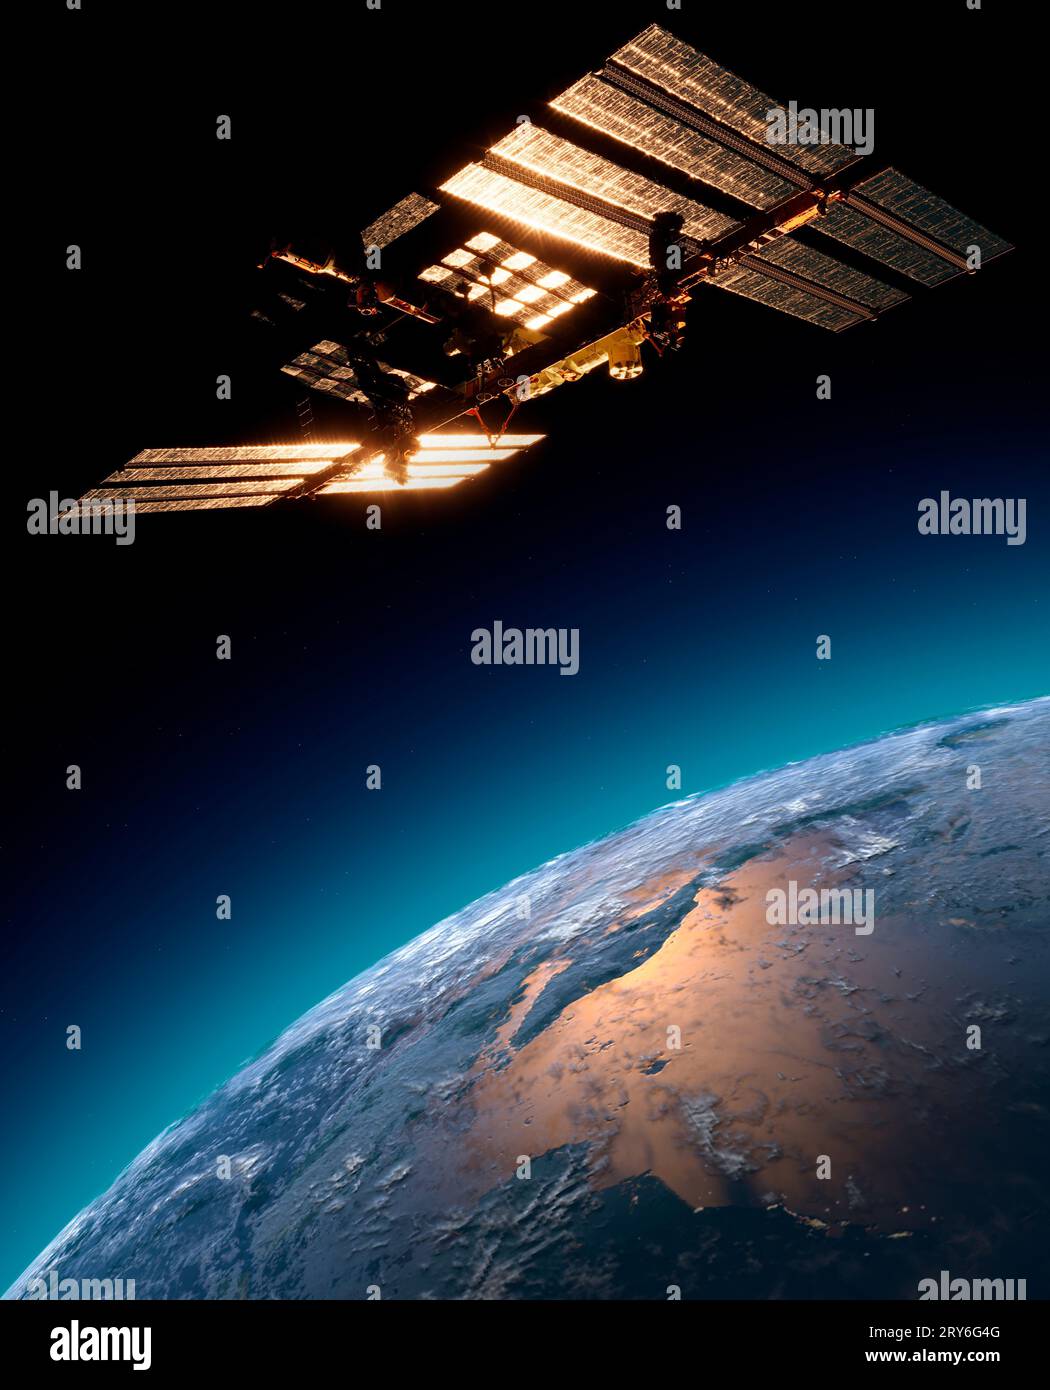 The International Space Station (ISS) is a space station, or a habitable artificial satellite, in low Earth orbit. Stock Photo